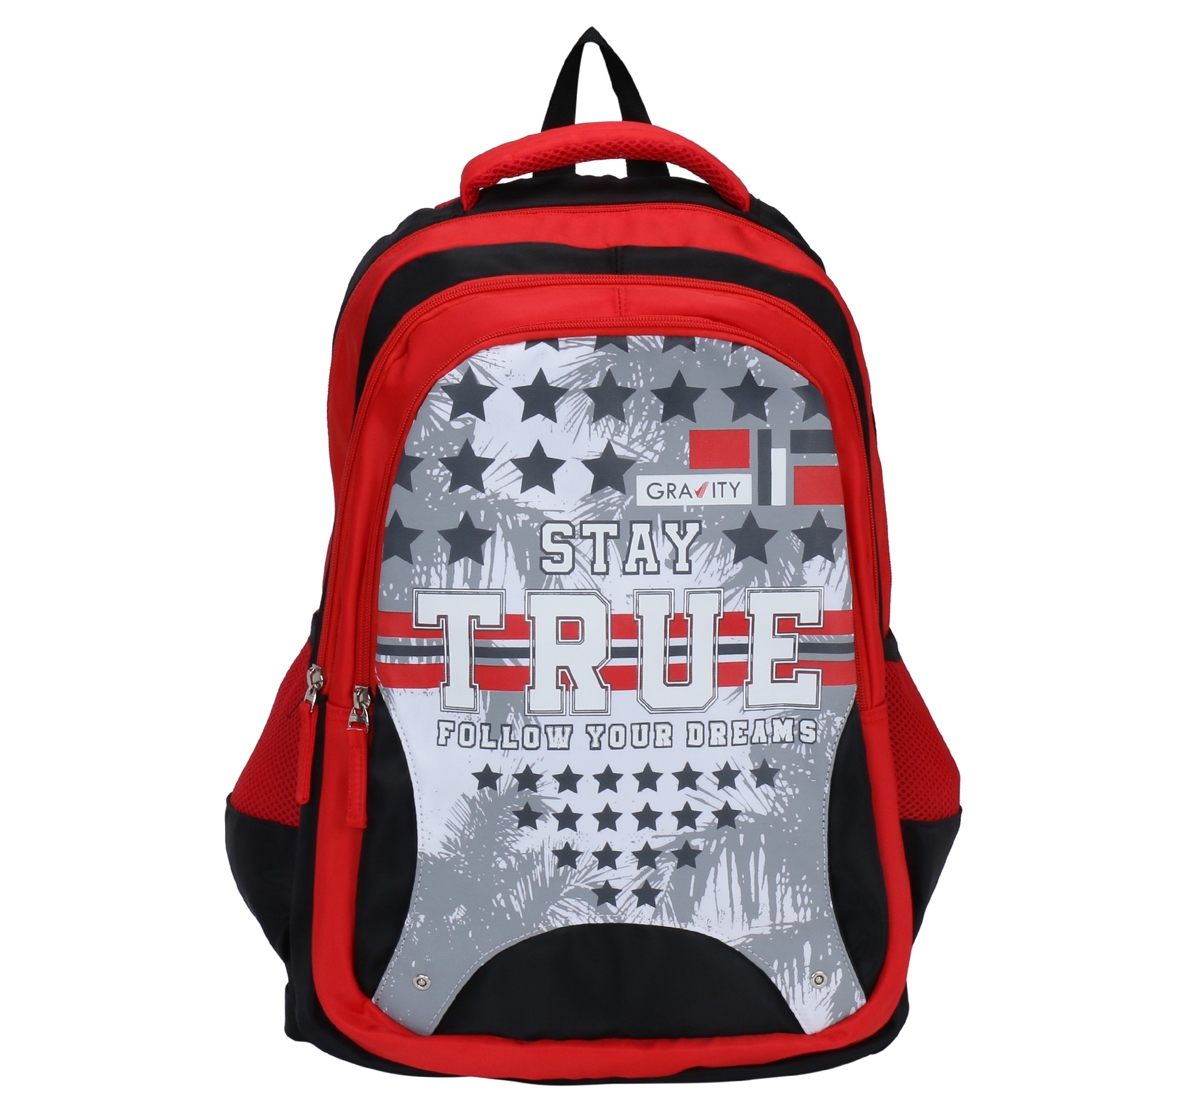 Simba | Simba Gravity Follow Your Dreams 19 Backpack Multicolor 3Y+